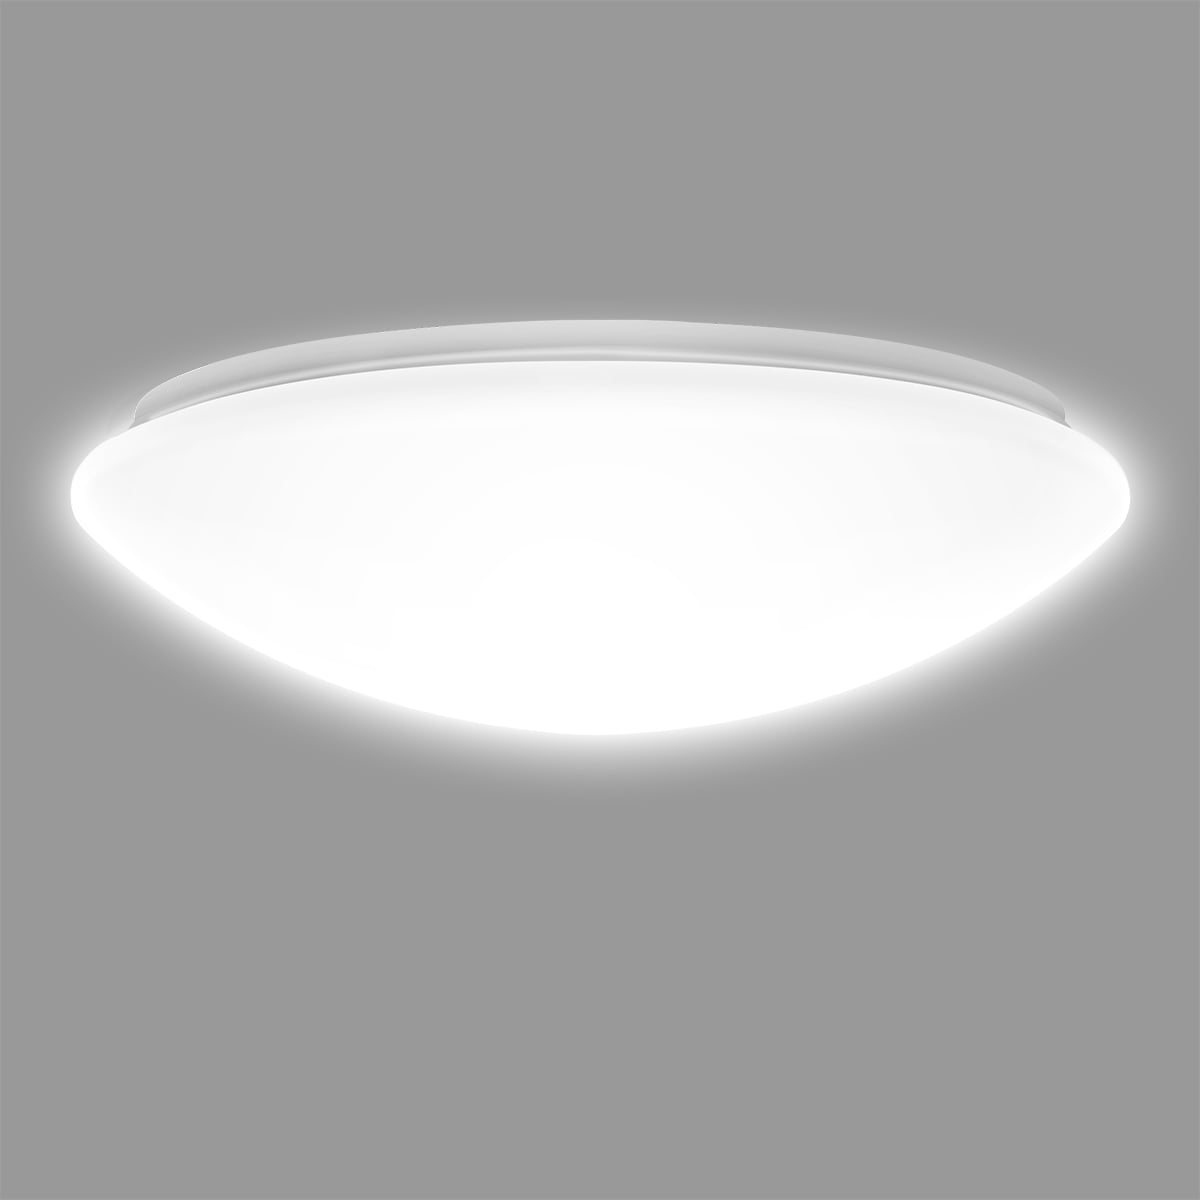 Details about   LED Ceiling Down Light Ultra Thin Flush Mount Kitchen Lamp Home Fixture Dimmable 